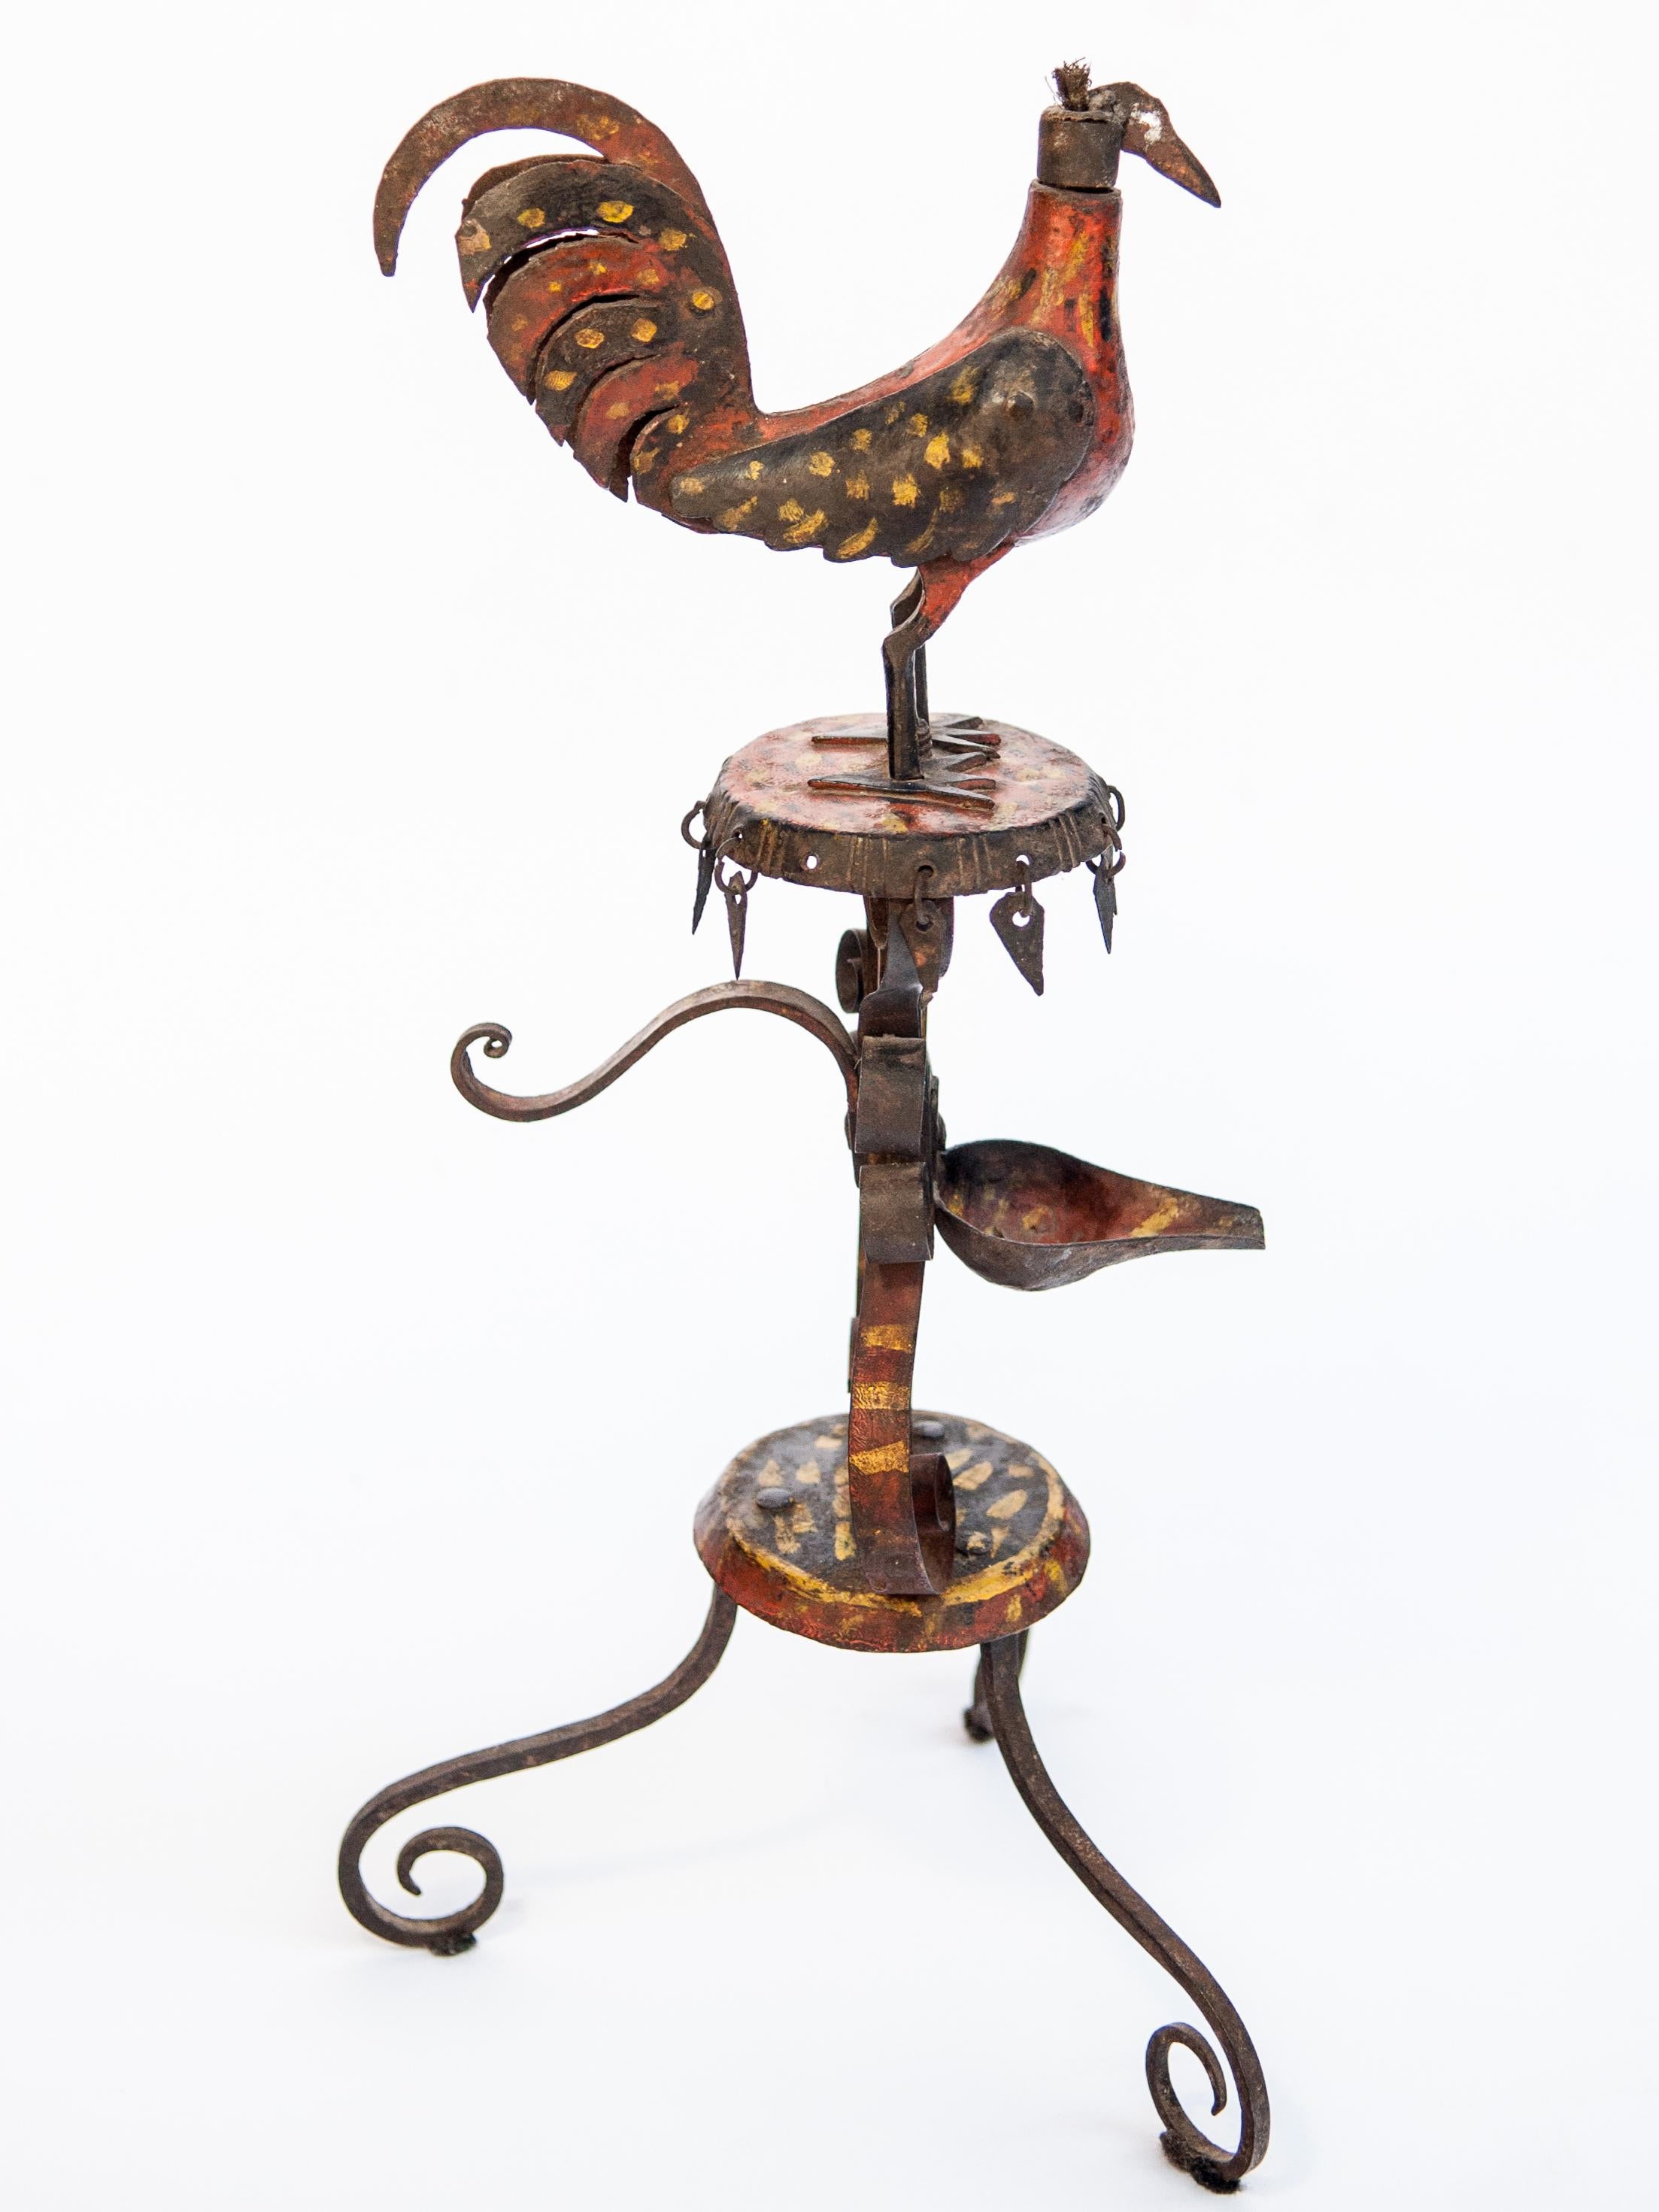 Vintage metal oil lamp rooster motif original color, Rural Nepal, mid-20th century.
Charming Folk Art lamp from the hills of west central Nepal. It was worked by a village blacksmith, fashioned of wrought iron using basic tools, and then painted.